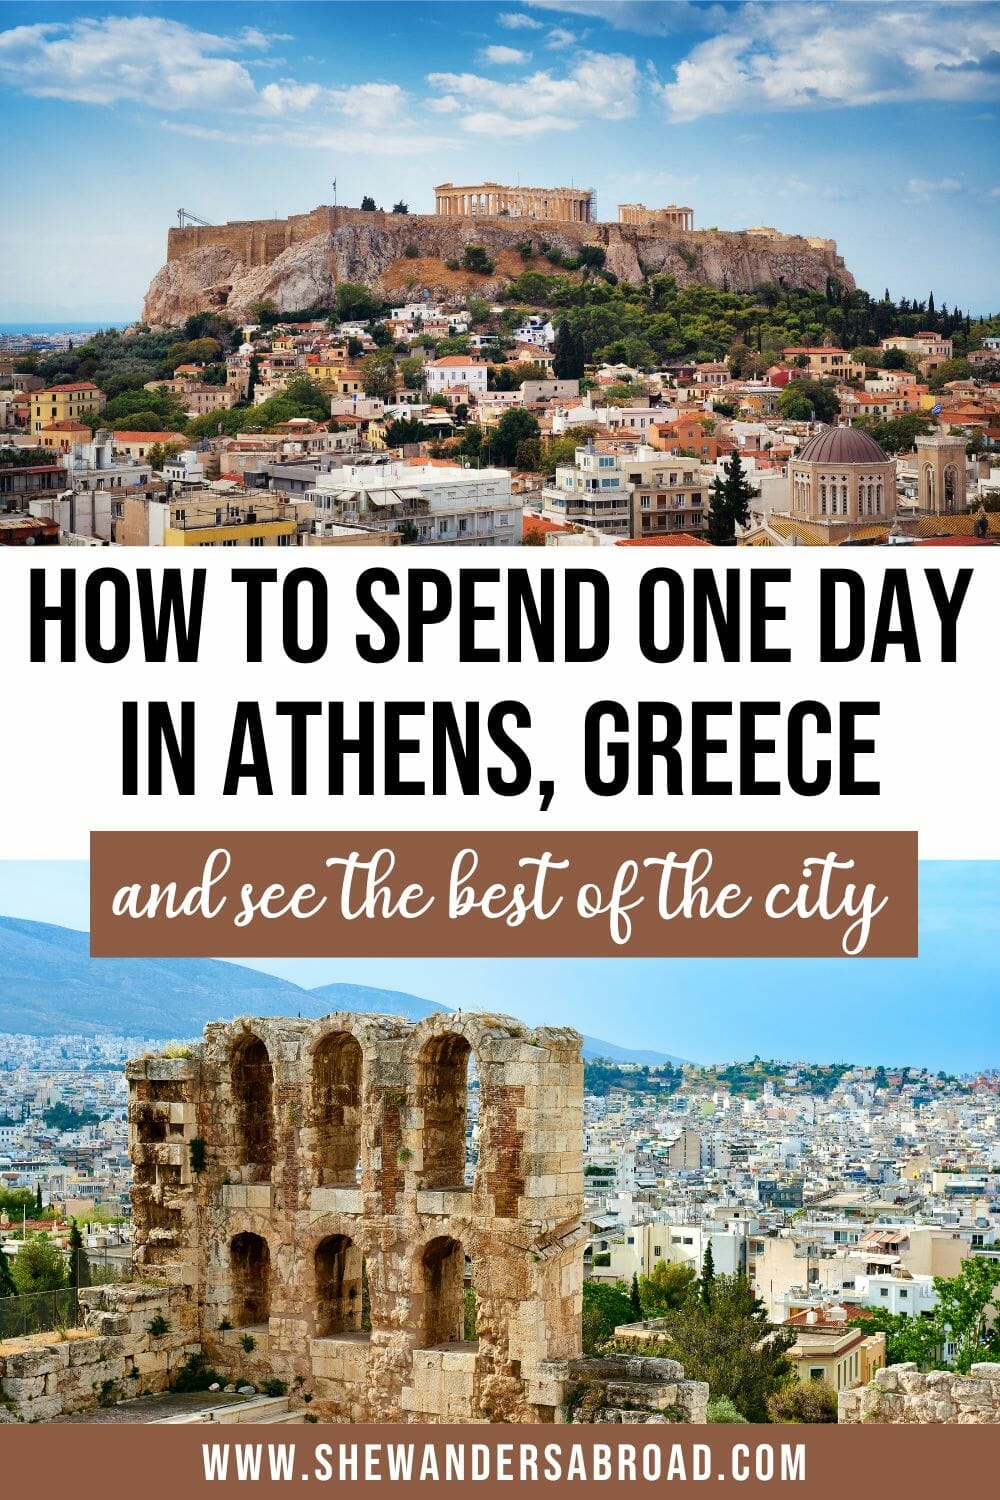 One Day in Athens: How to See the Best of Athens in a Day